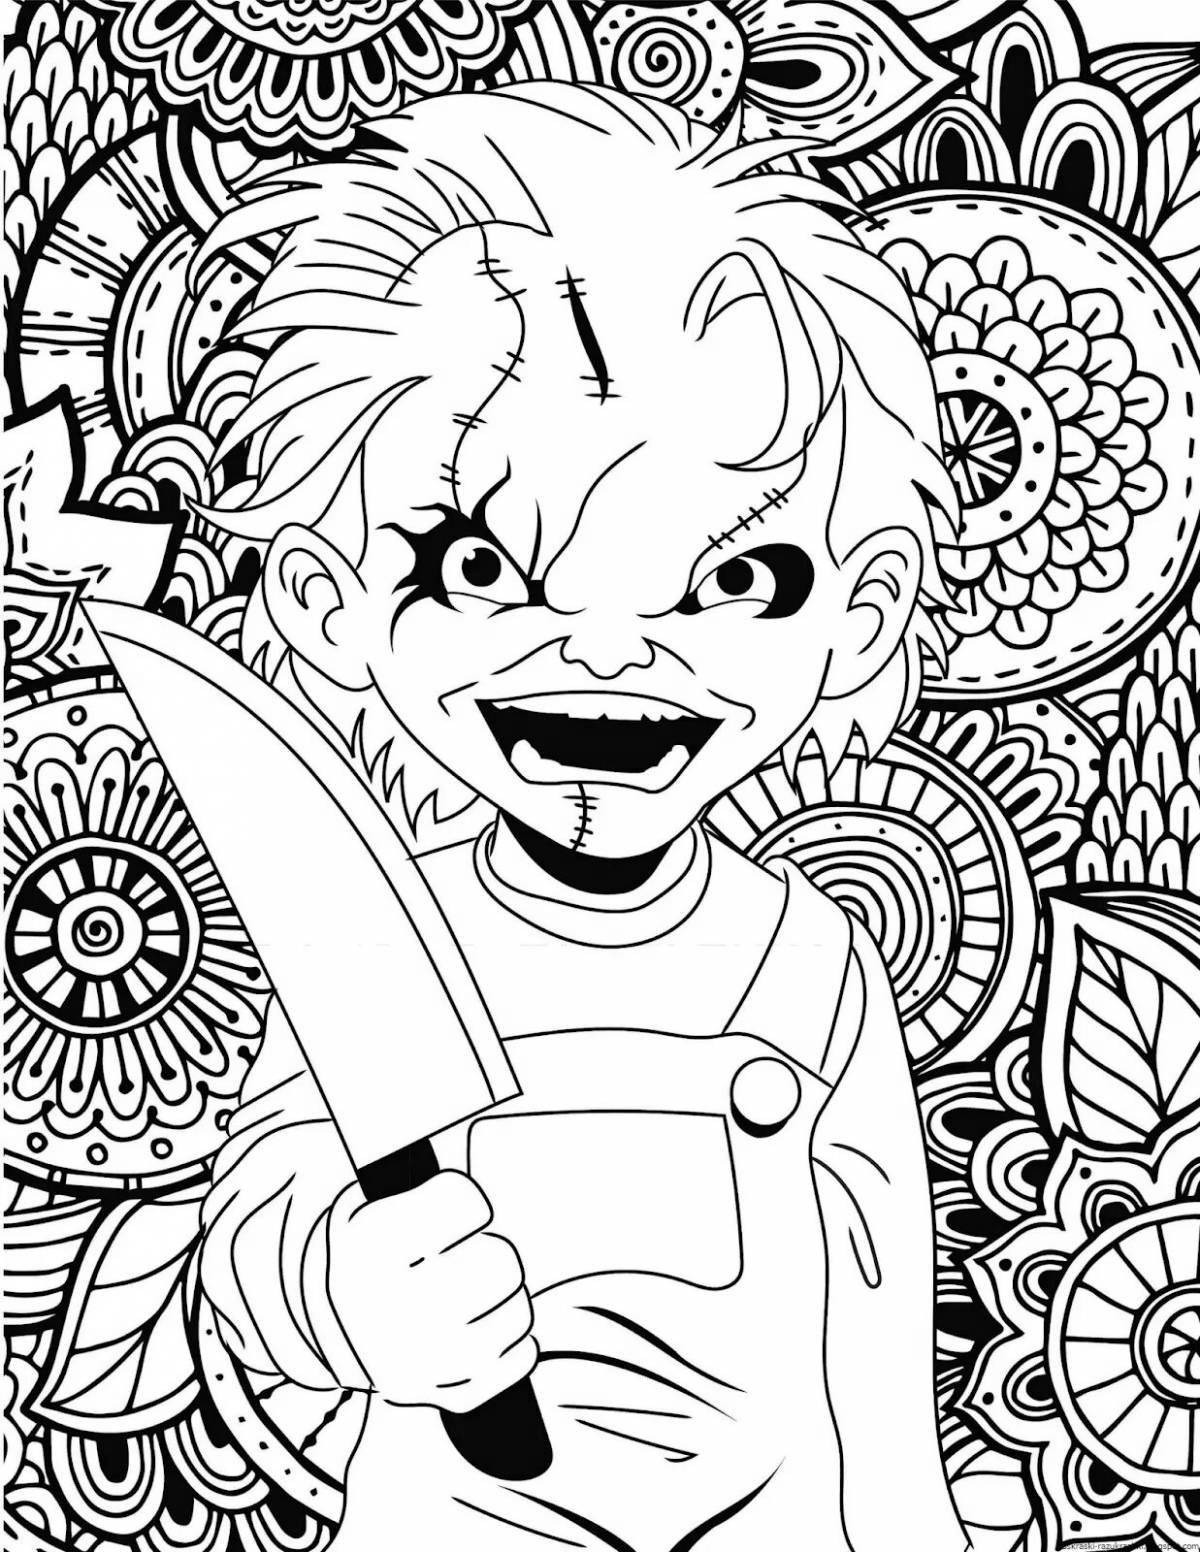 Scary horror coloring pages